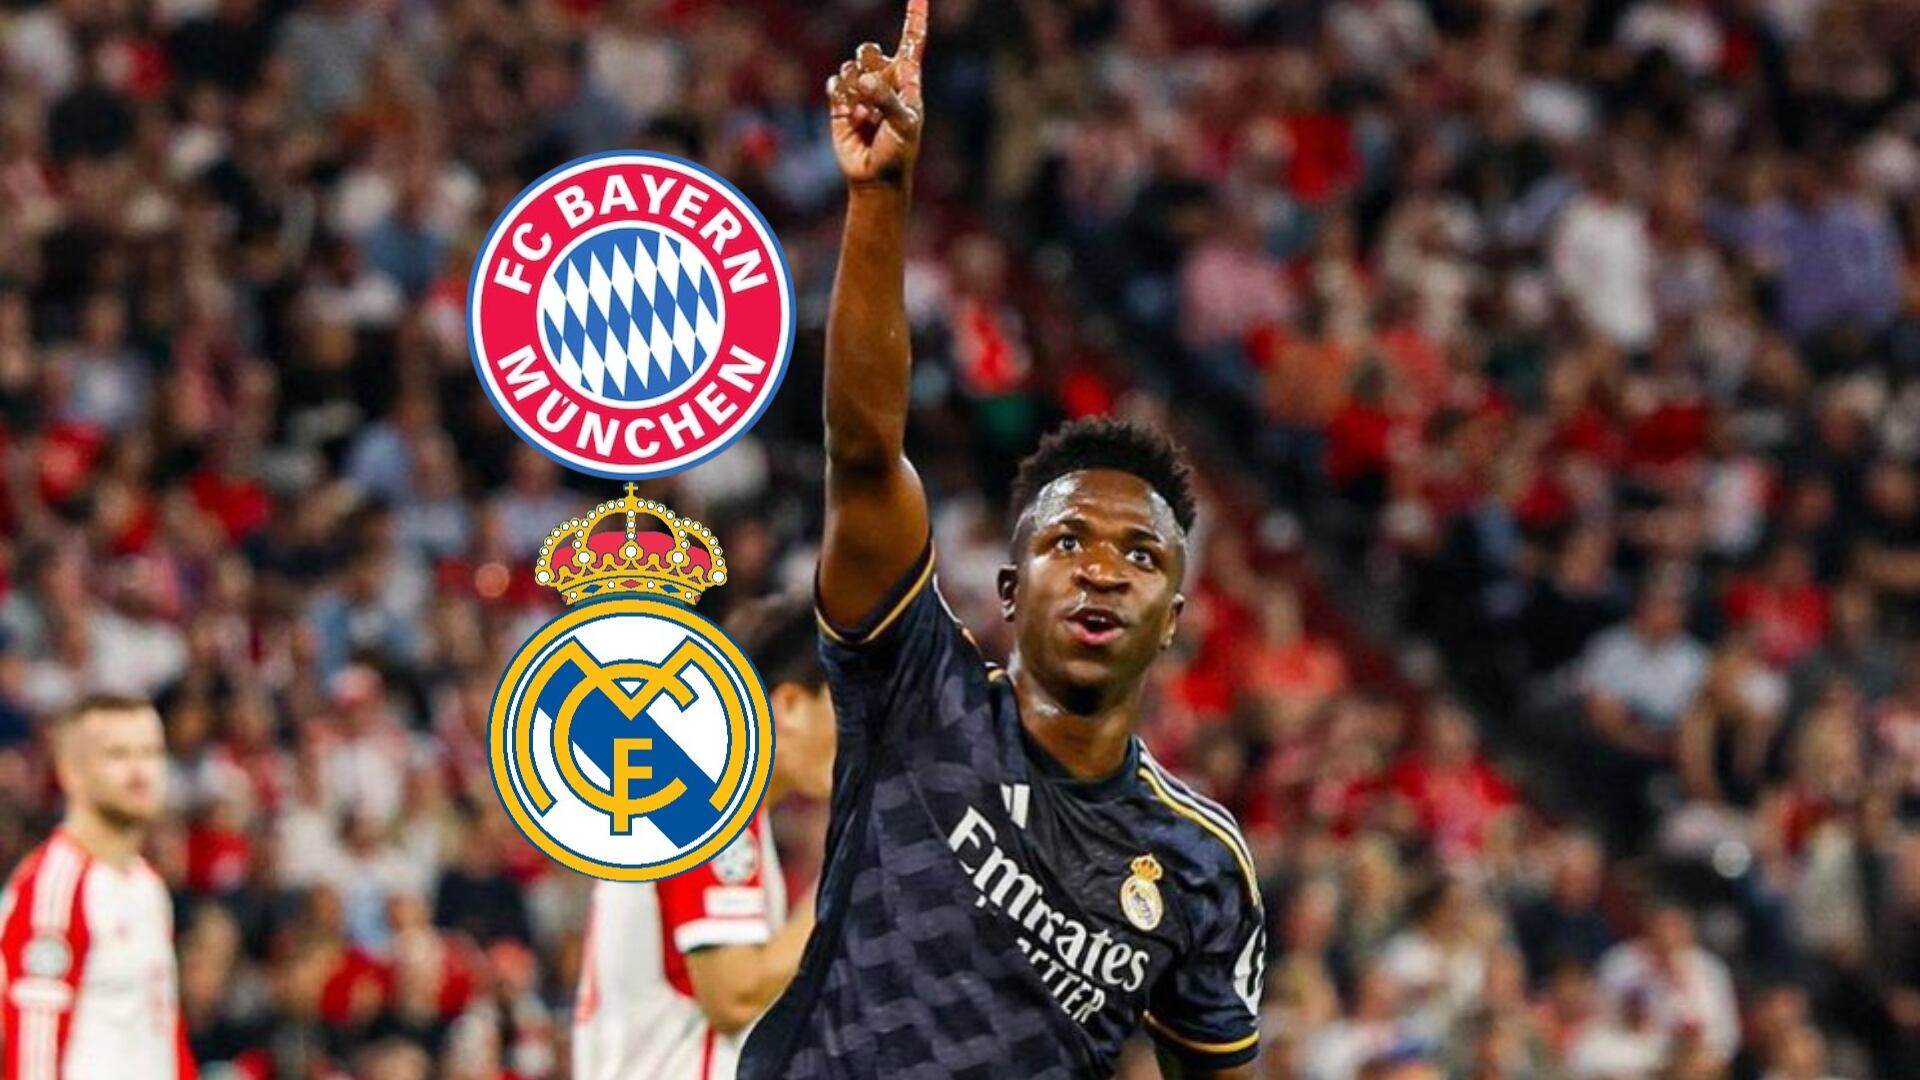 Vinicius was the MVP of Real Madrid vs Bayern in the Champions League; the message that excites Madrid fans